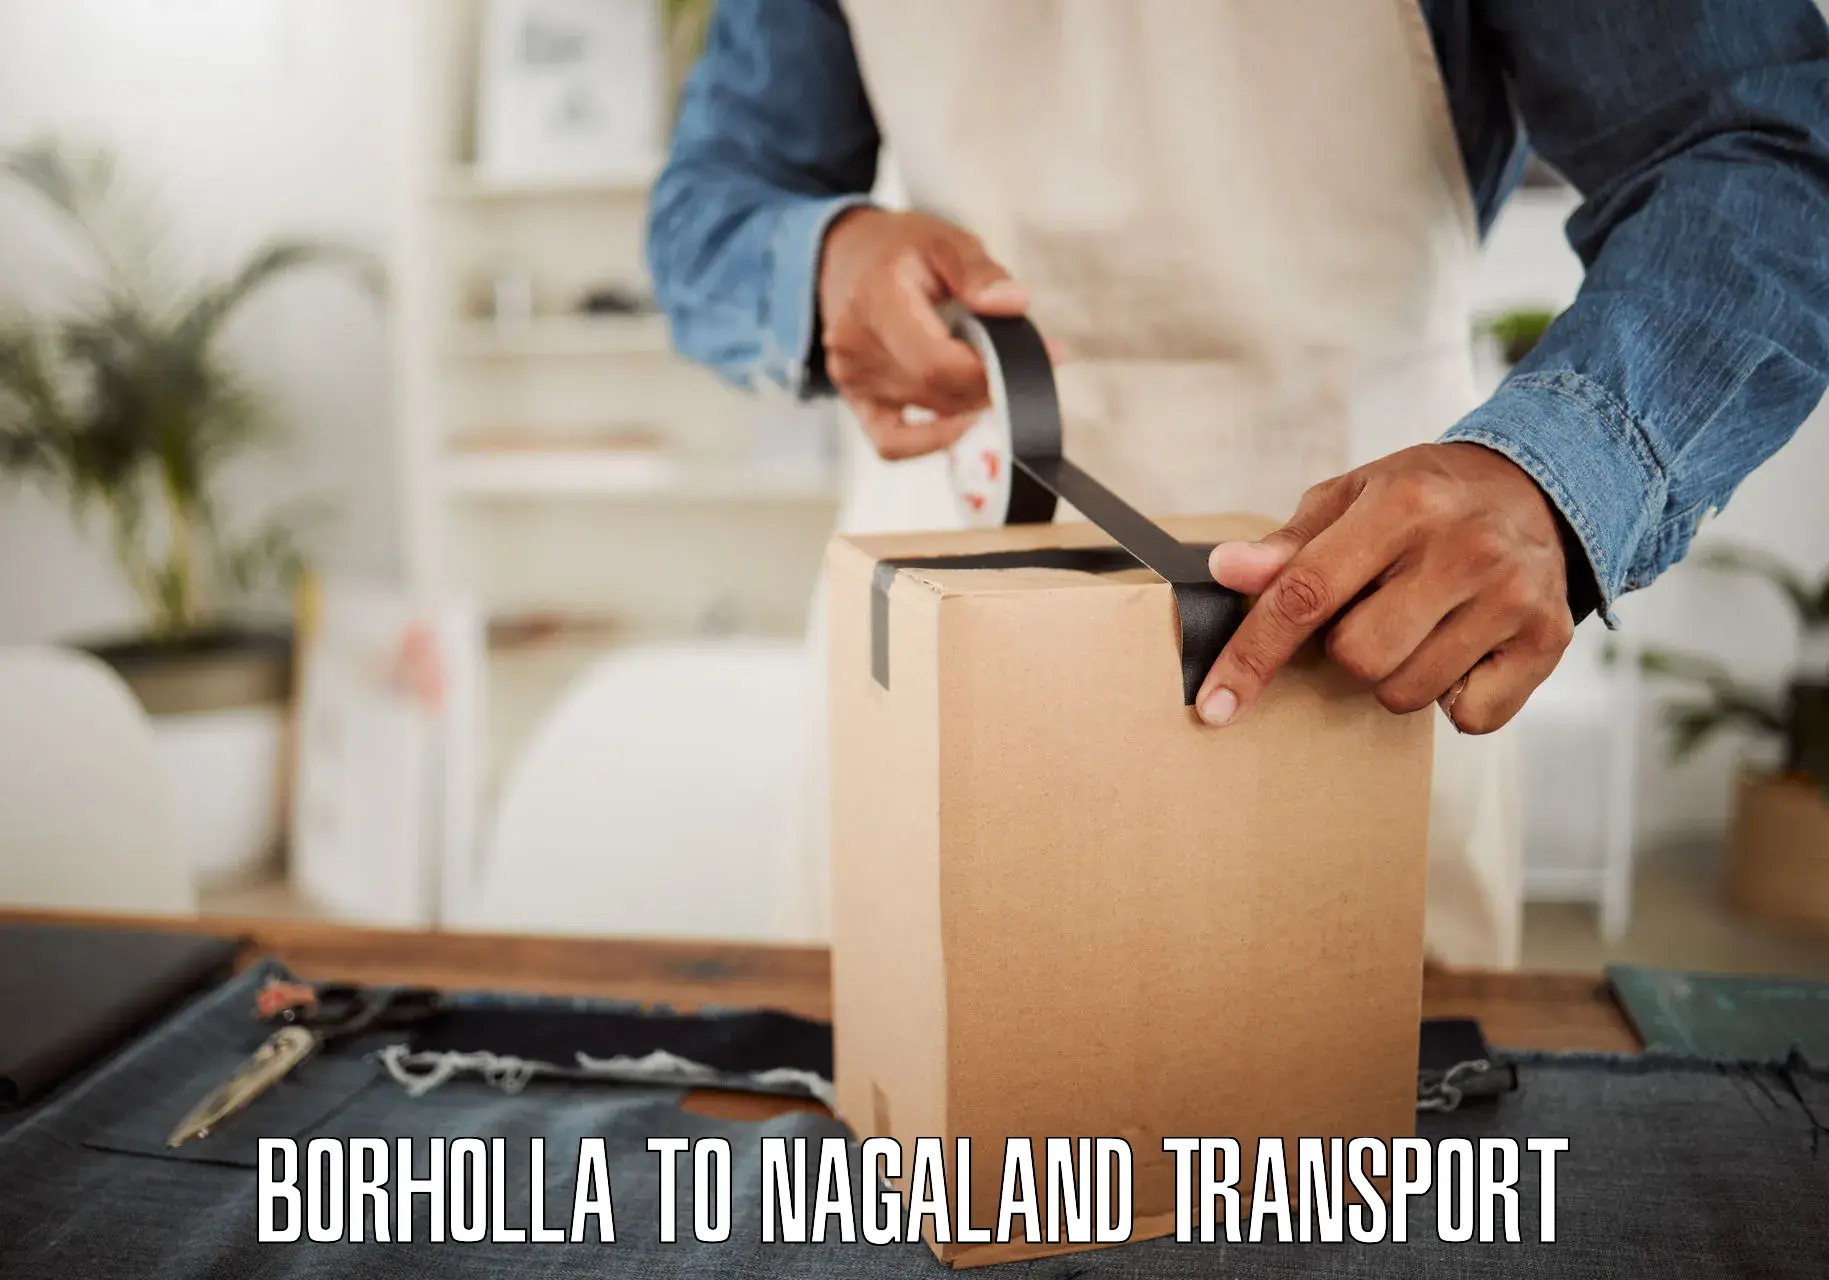 Truck transport companies in India Borholla to Nagaland